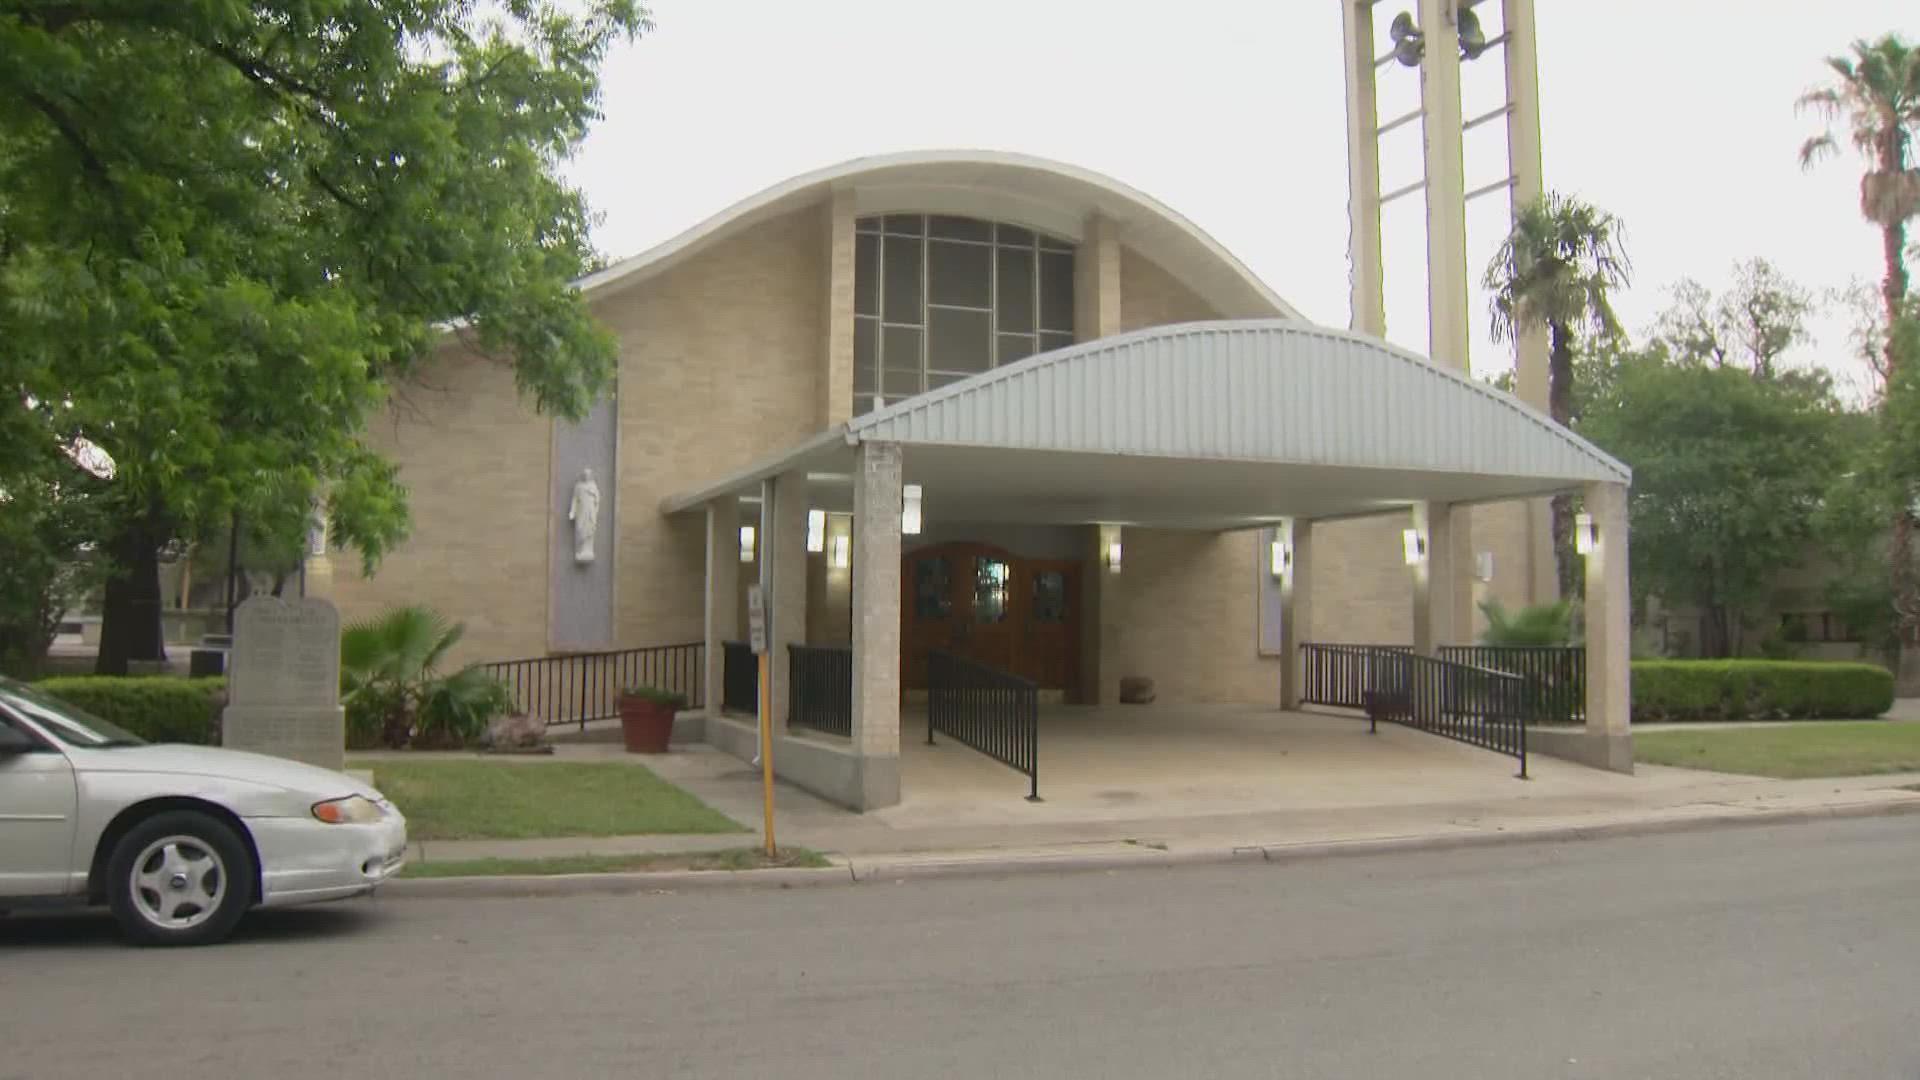 The church says six former Robb Elementary students have already signed up to attend Sacred Heart Catholic School in Uvalde.